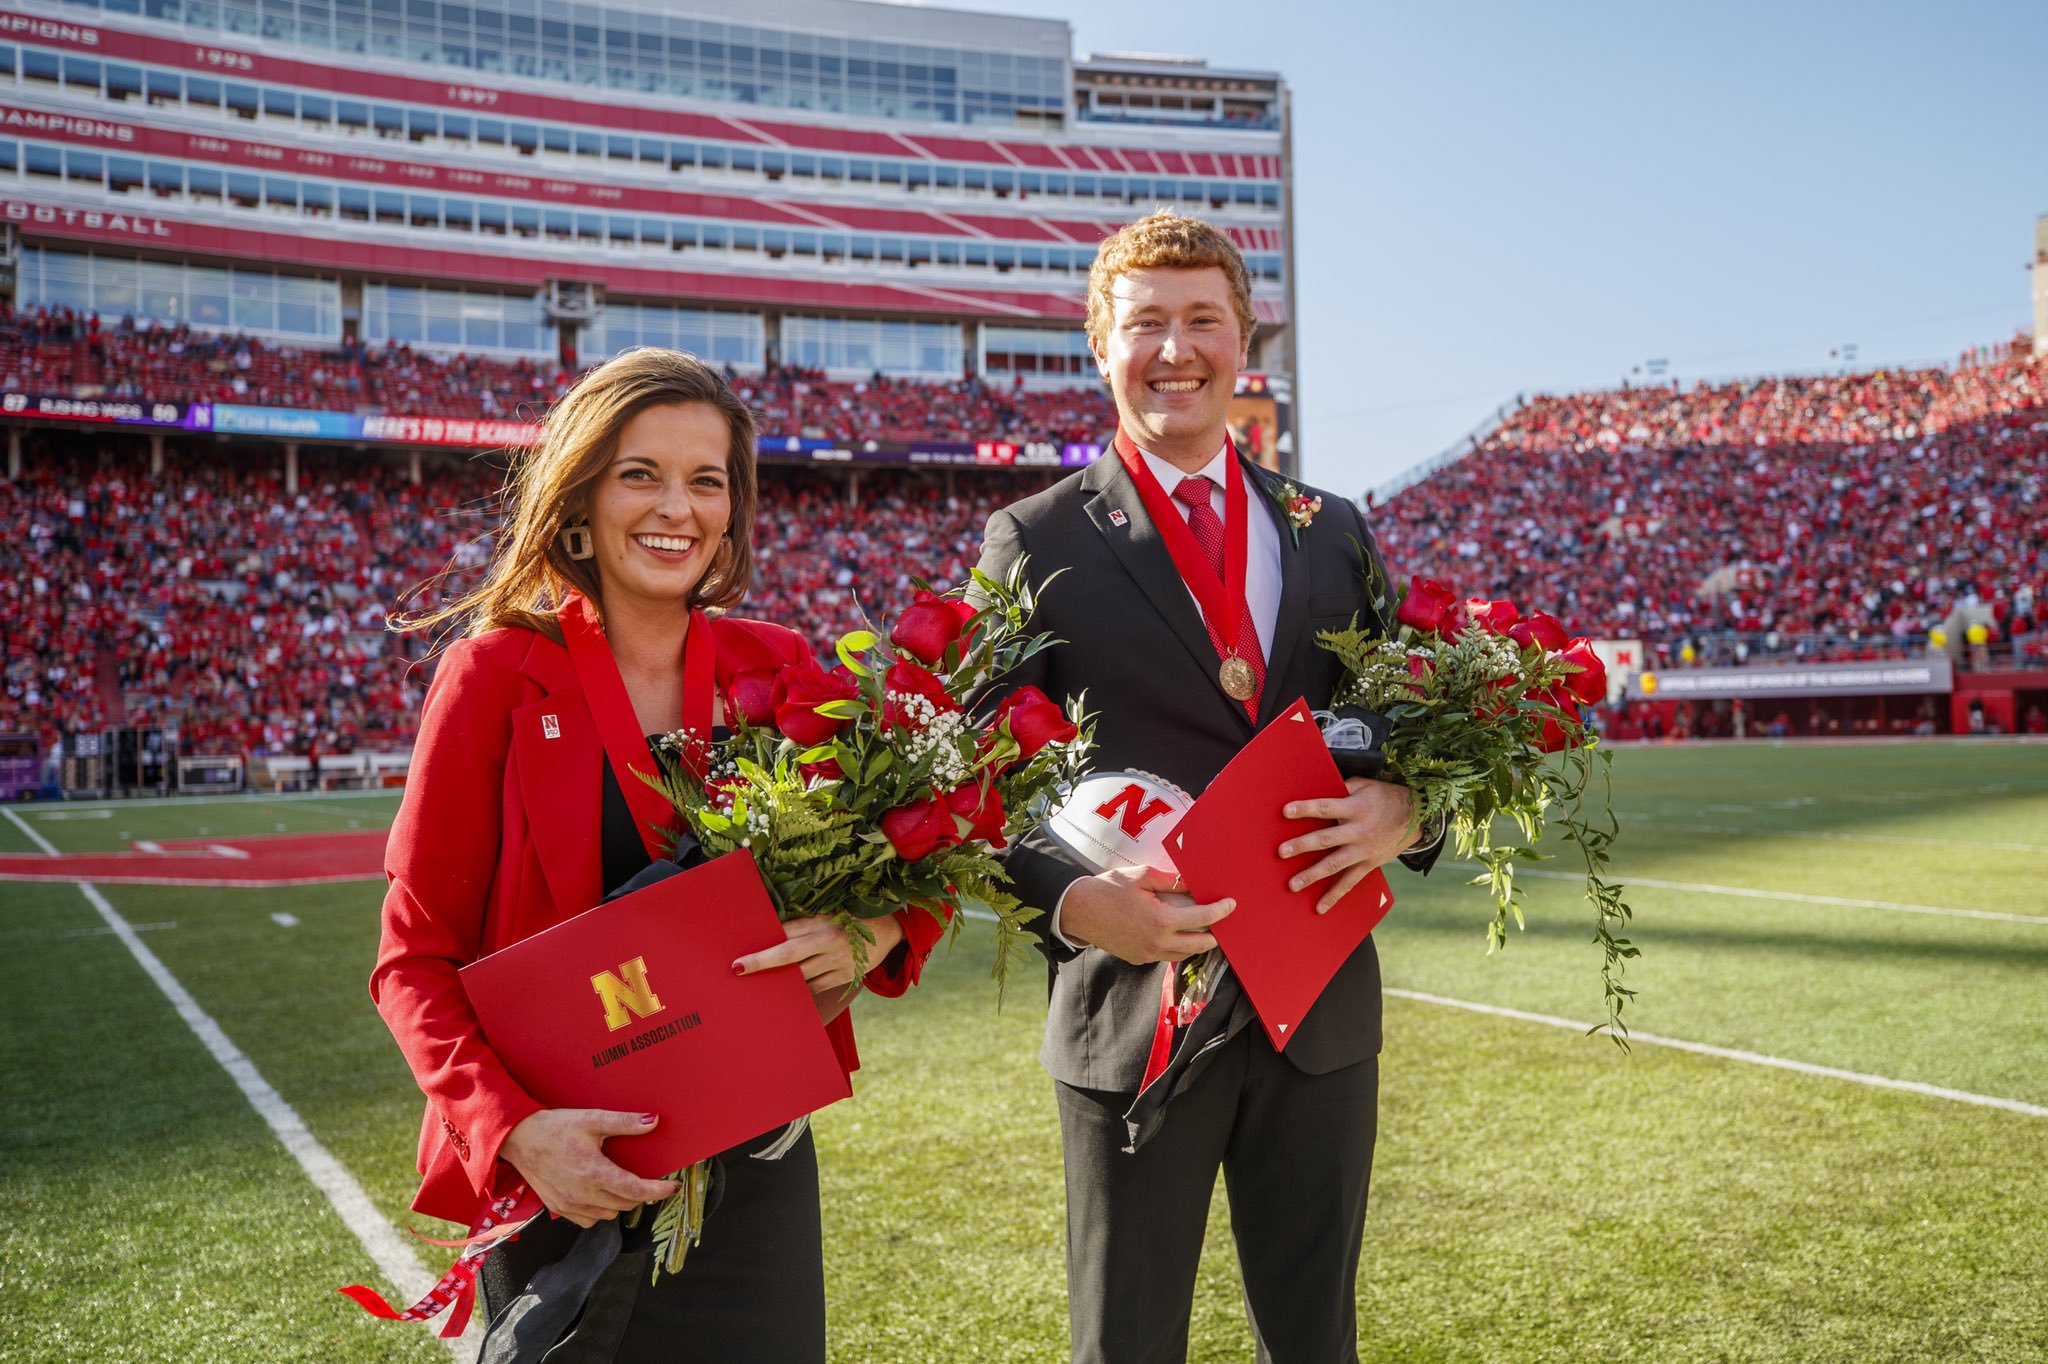 2019 Homecoming Queen and King stand with flowers and medals in the middle of the football field at halftime